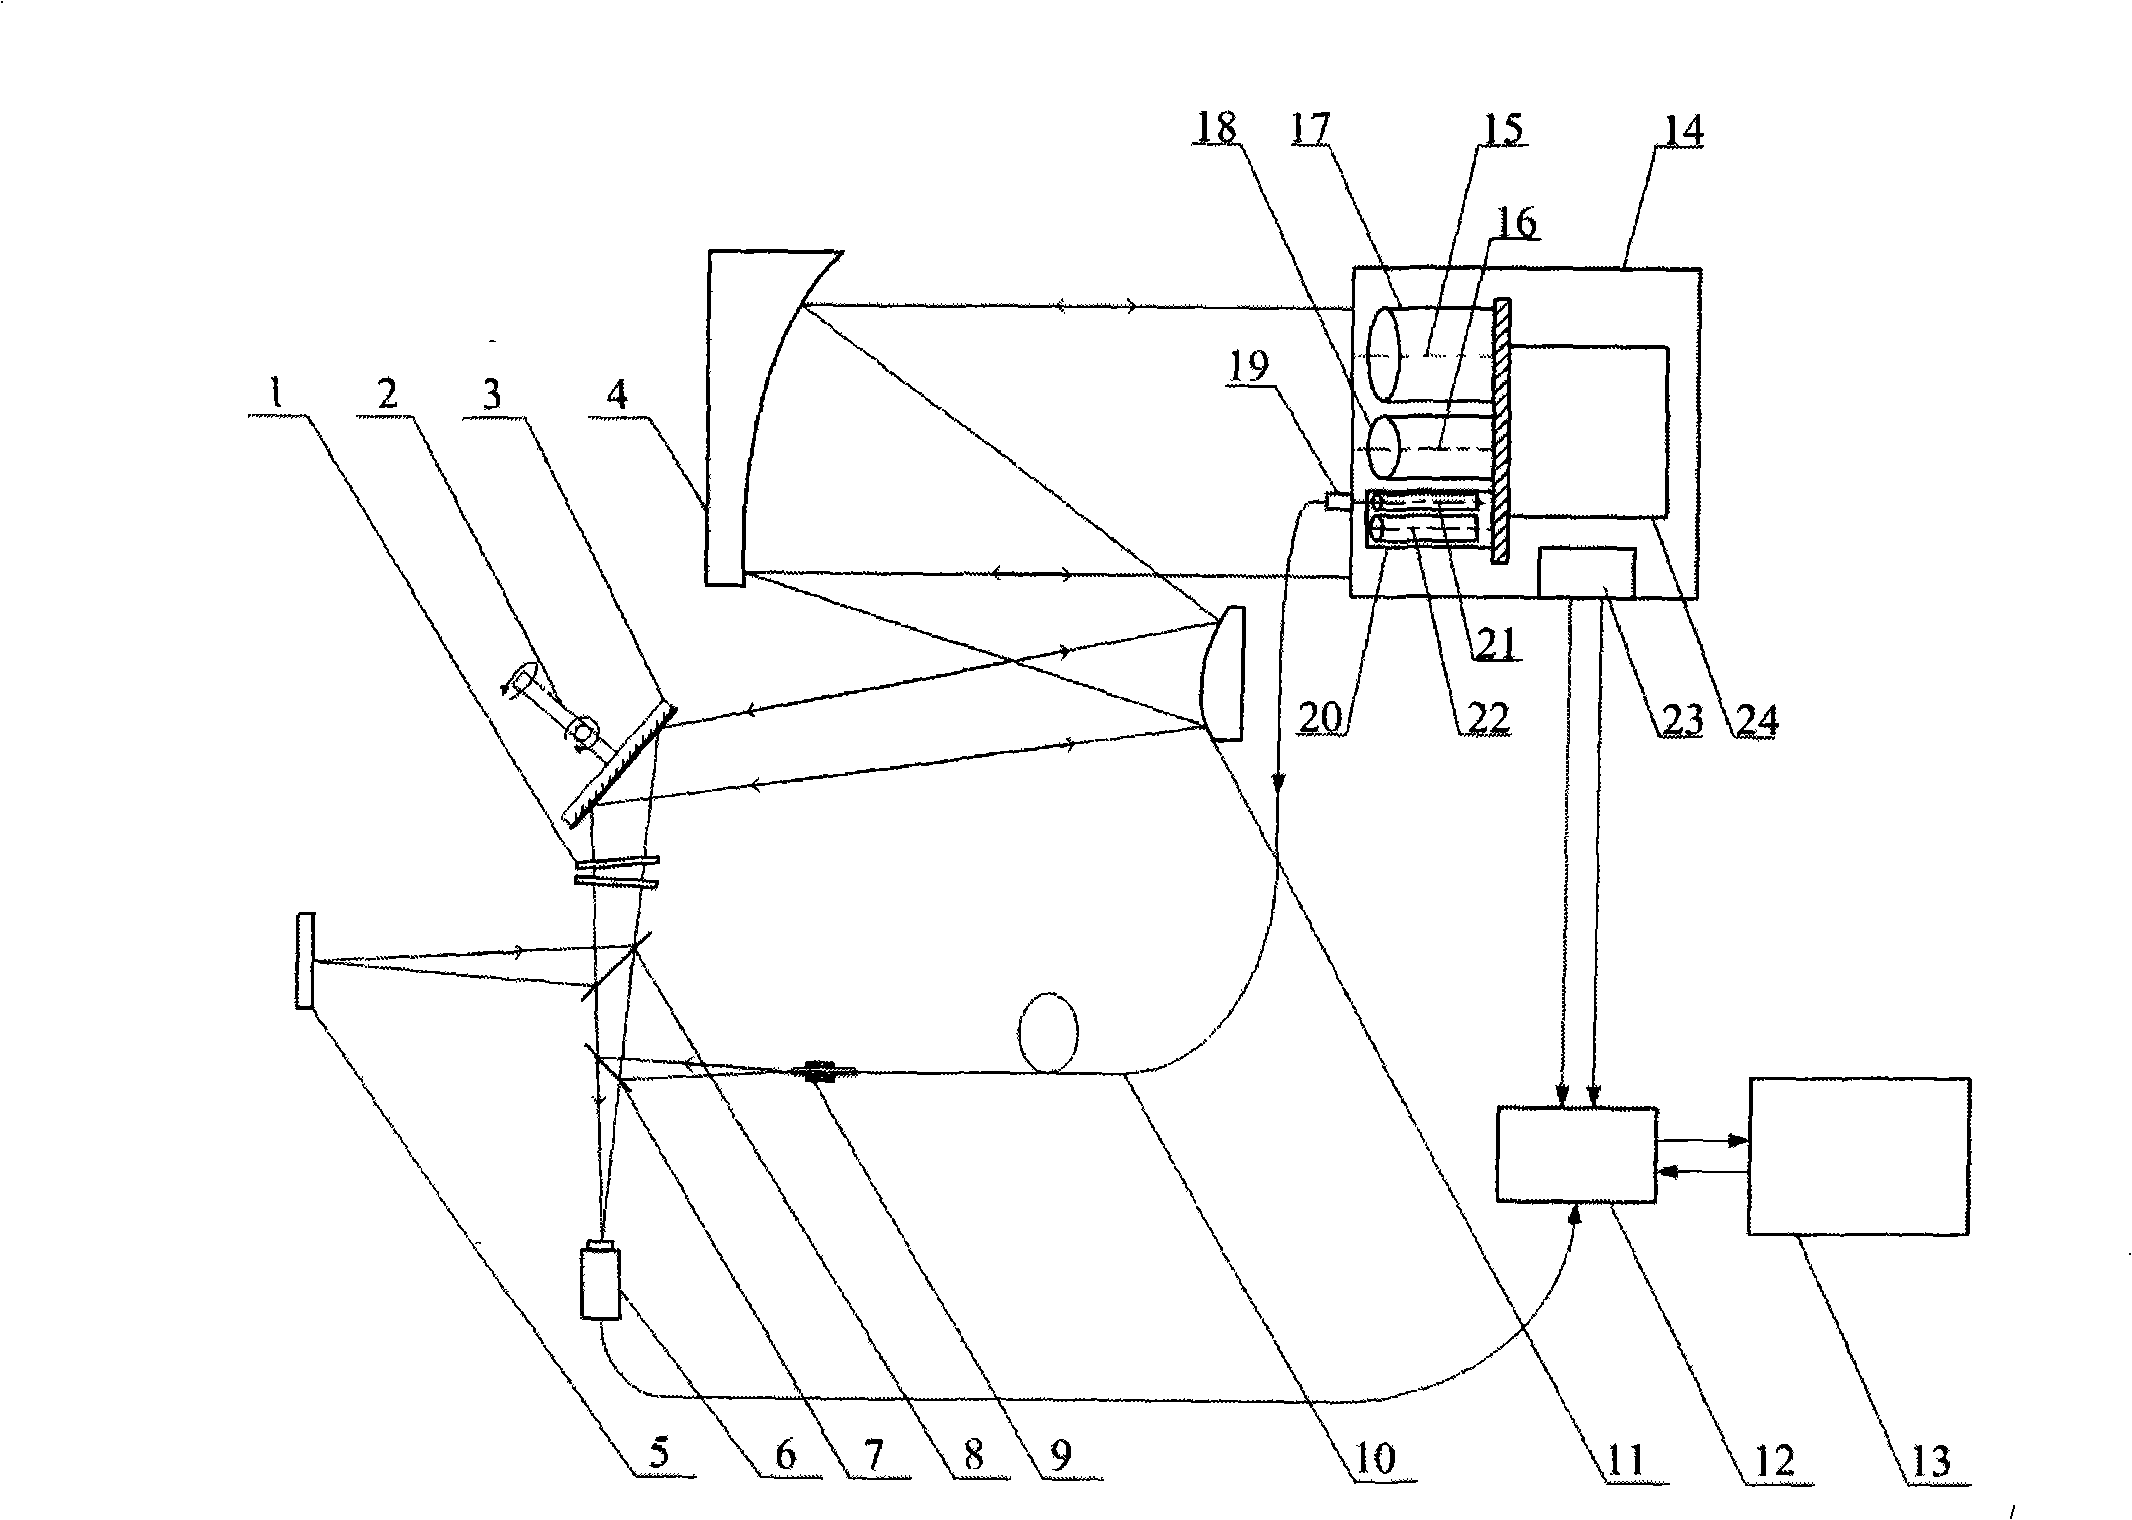 Multi-light axis consistency test device based on multiband target plate and rotating reflection mirror